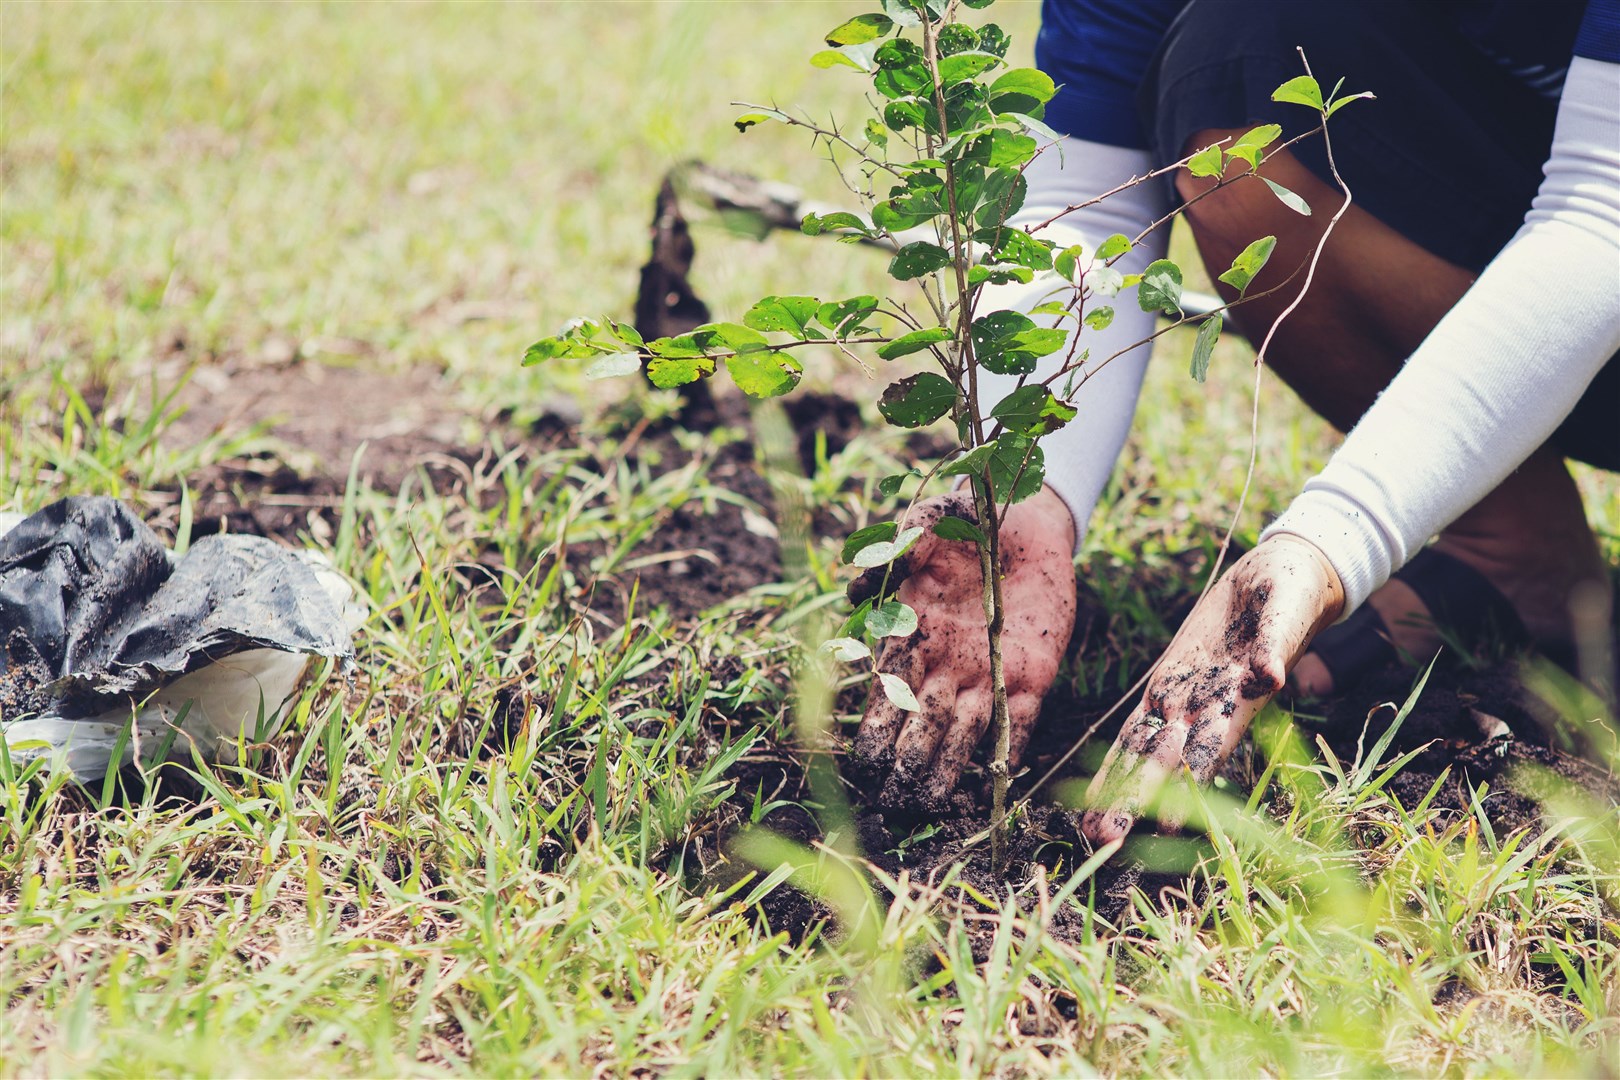 Projects which make environmental improvements to local green spaces could qualify for funding from Volunteering Matters Action Earth.